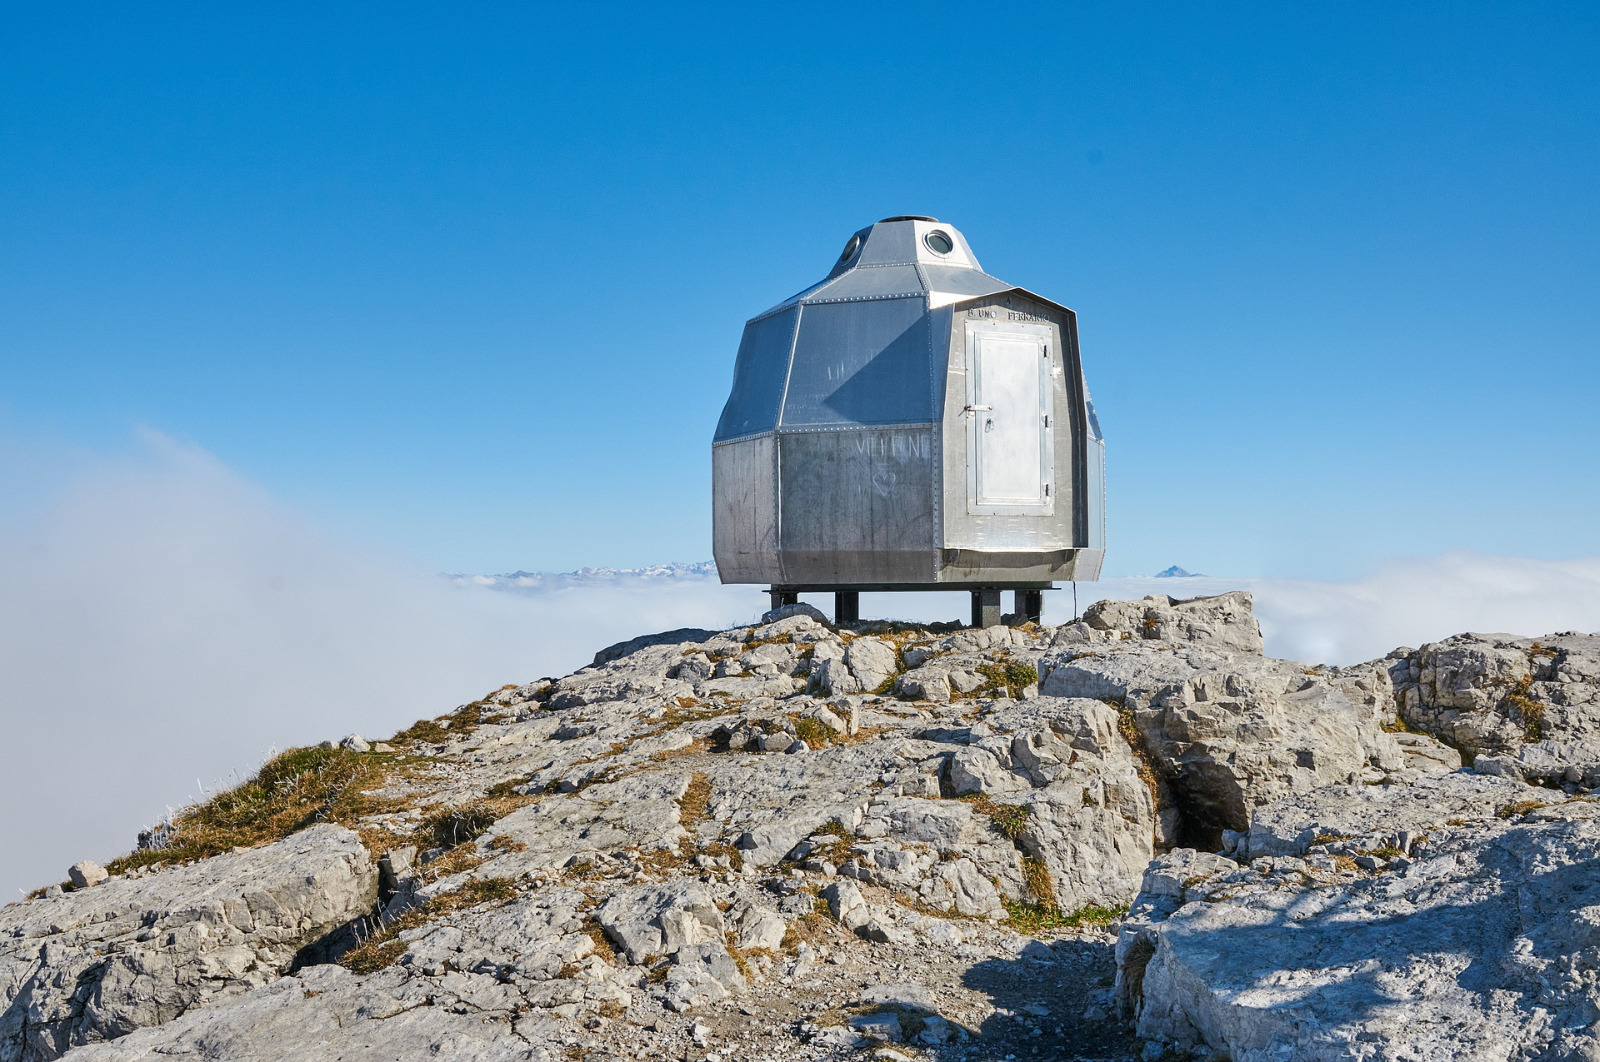 How the designers of mountain bivouacs are hitting new heights